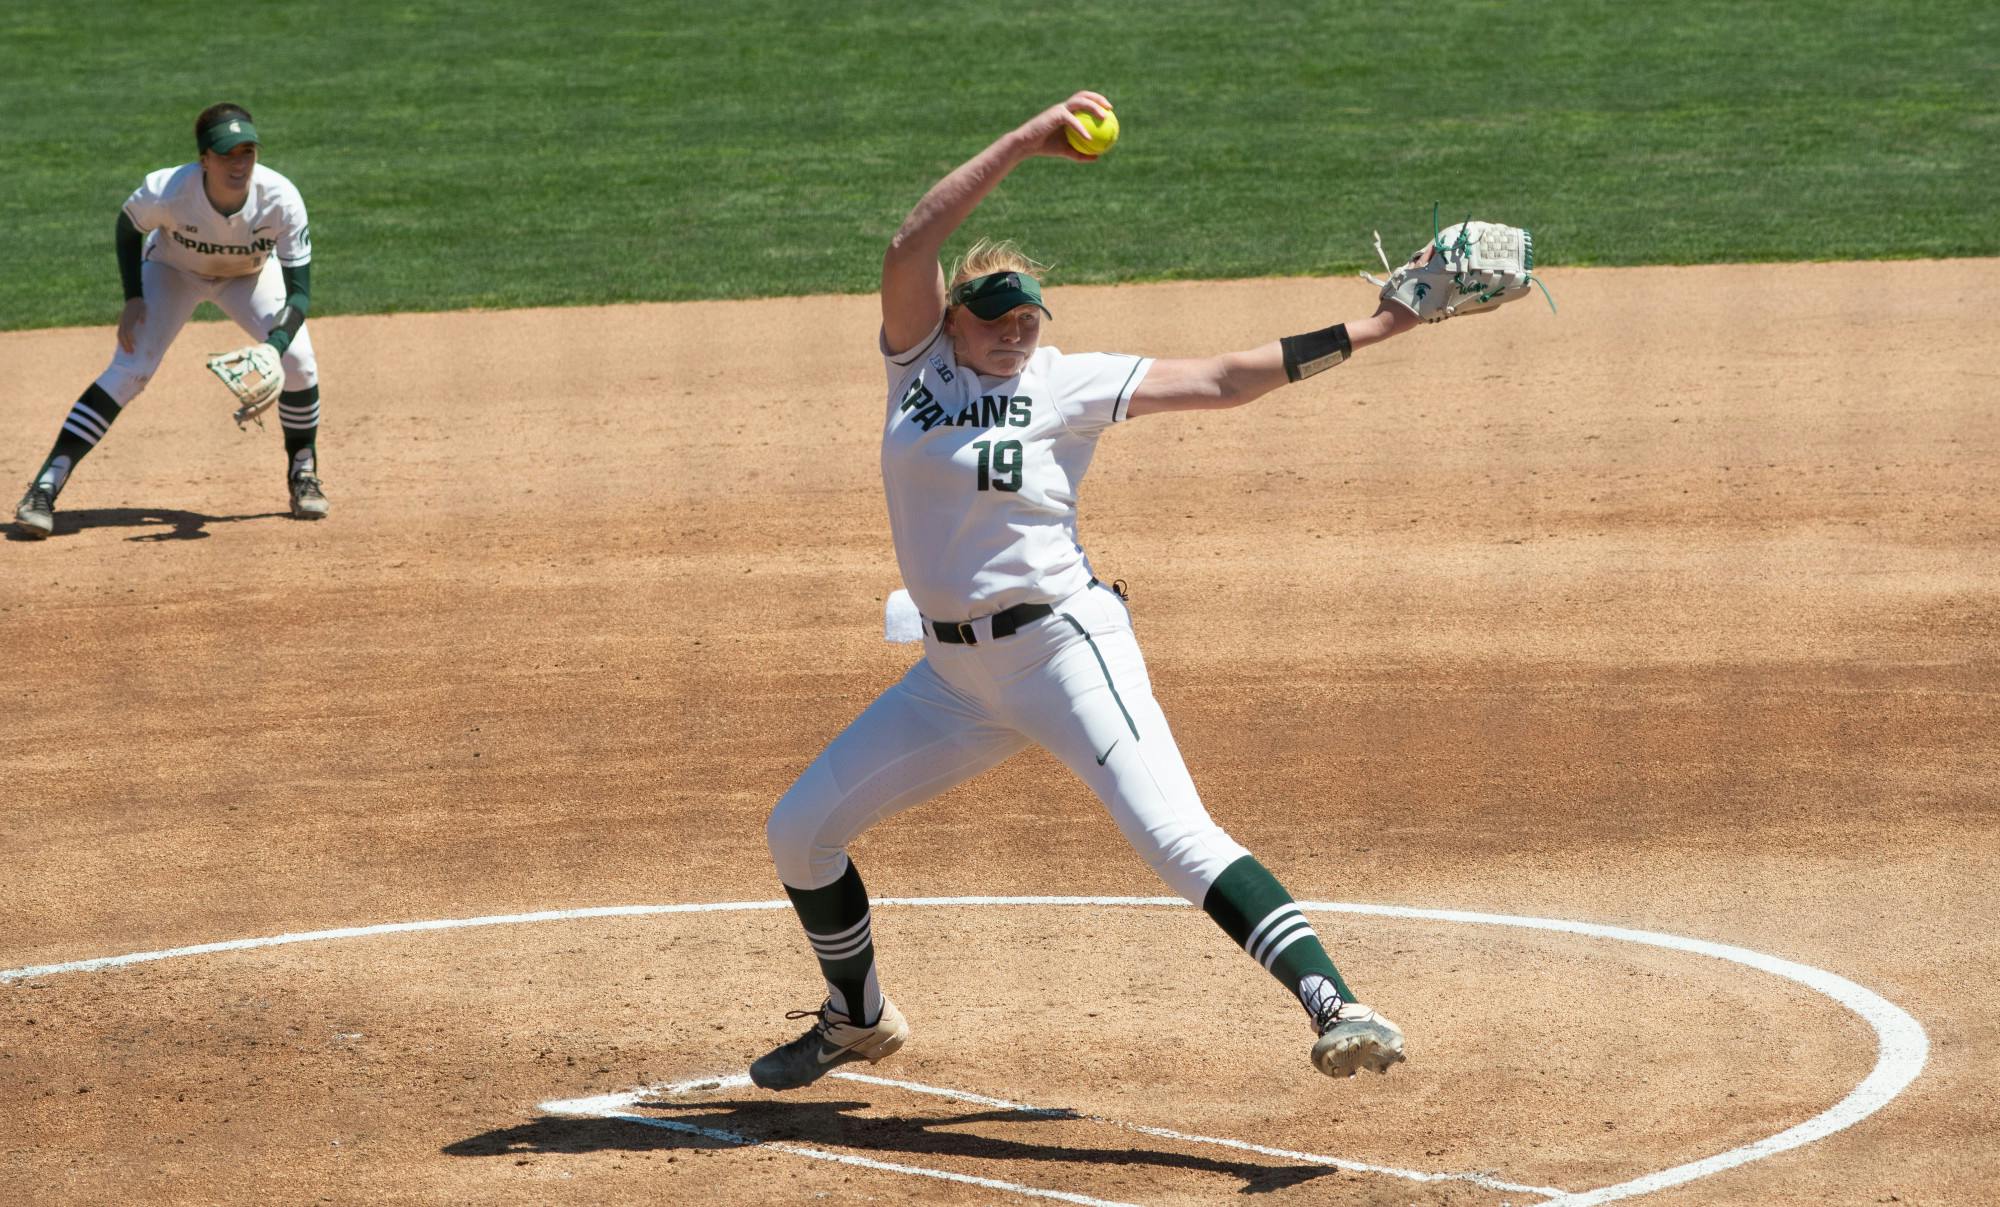 Michigan State's pitcher Alli Walker (19) pitches the ball in the Spartans' win over Purdue on April 25, 2021.